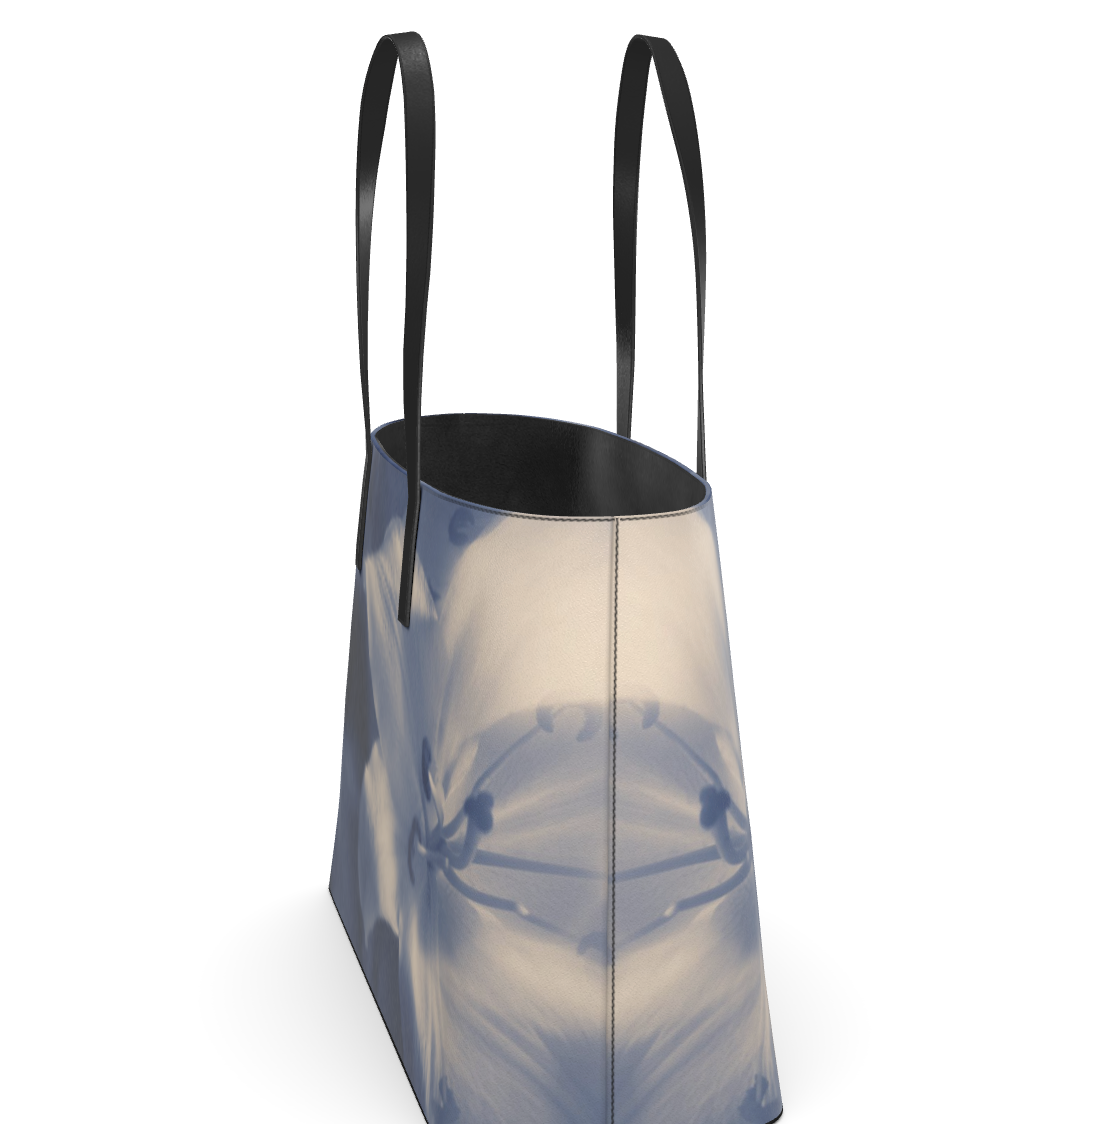 UNTITLED x Indira Cesarine "Blue Lillies" Kika Leather Tote Bag - Limited Edition